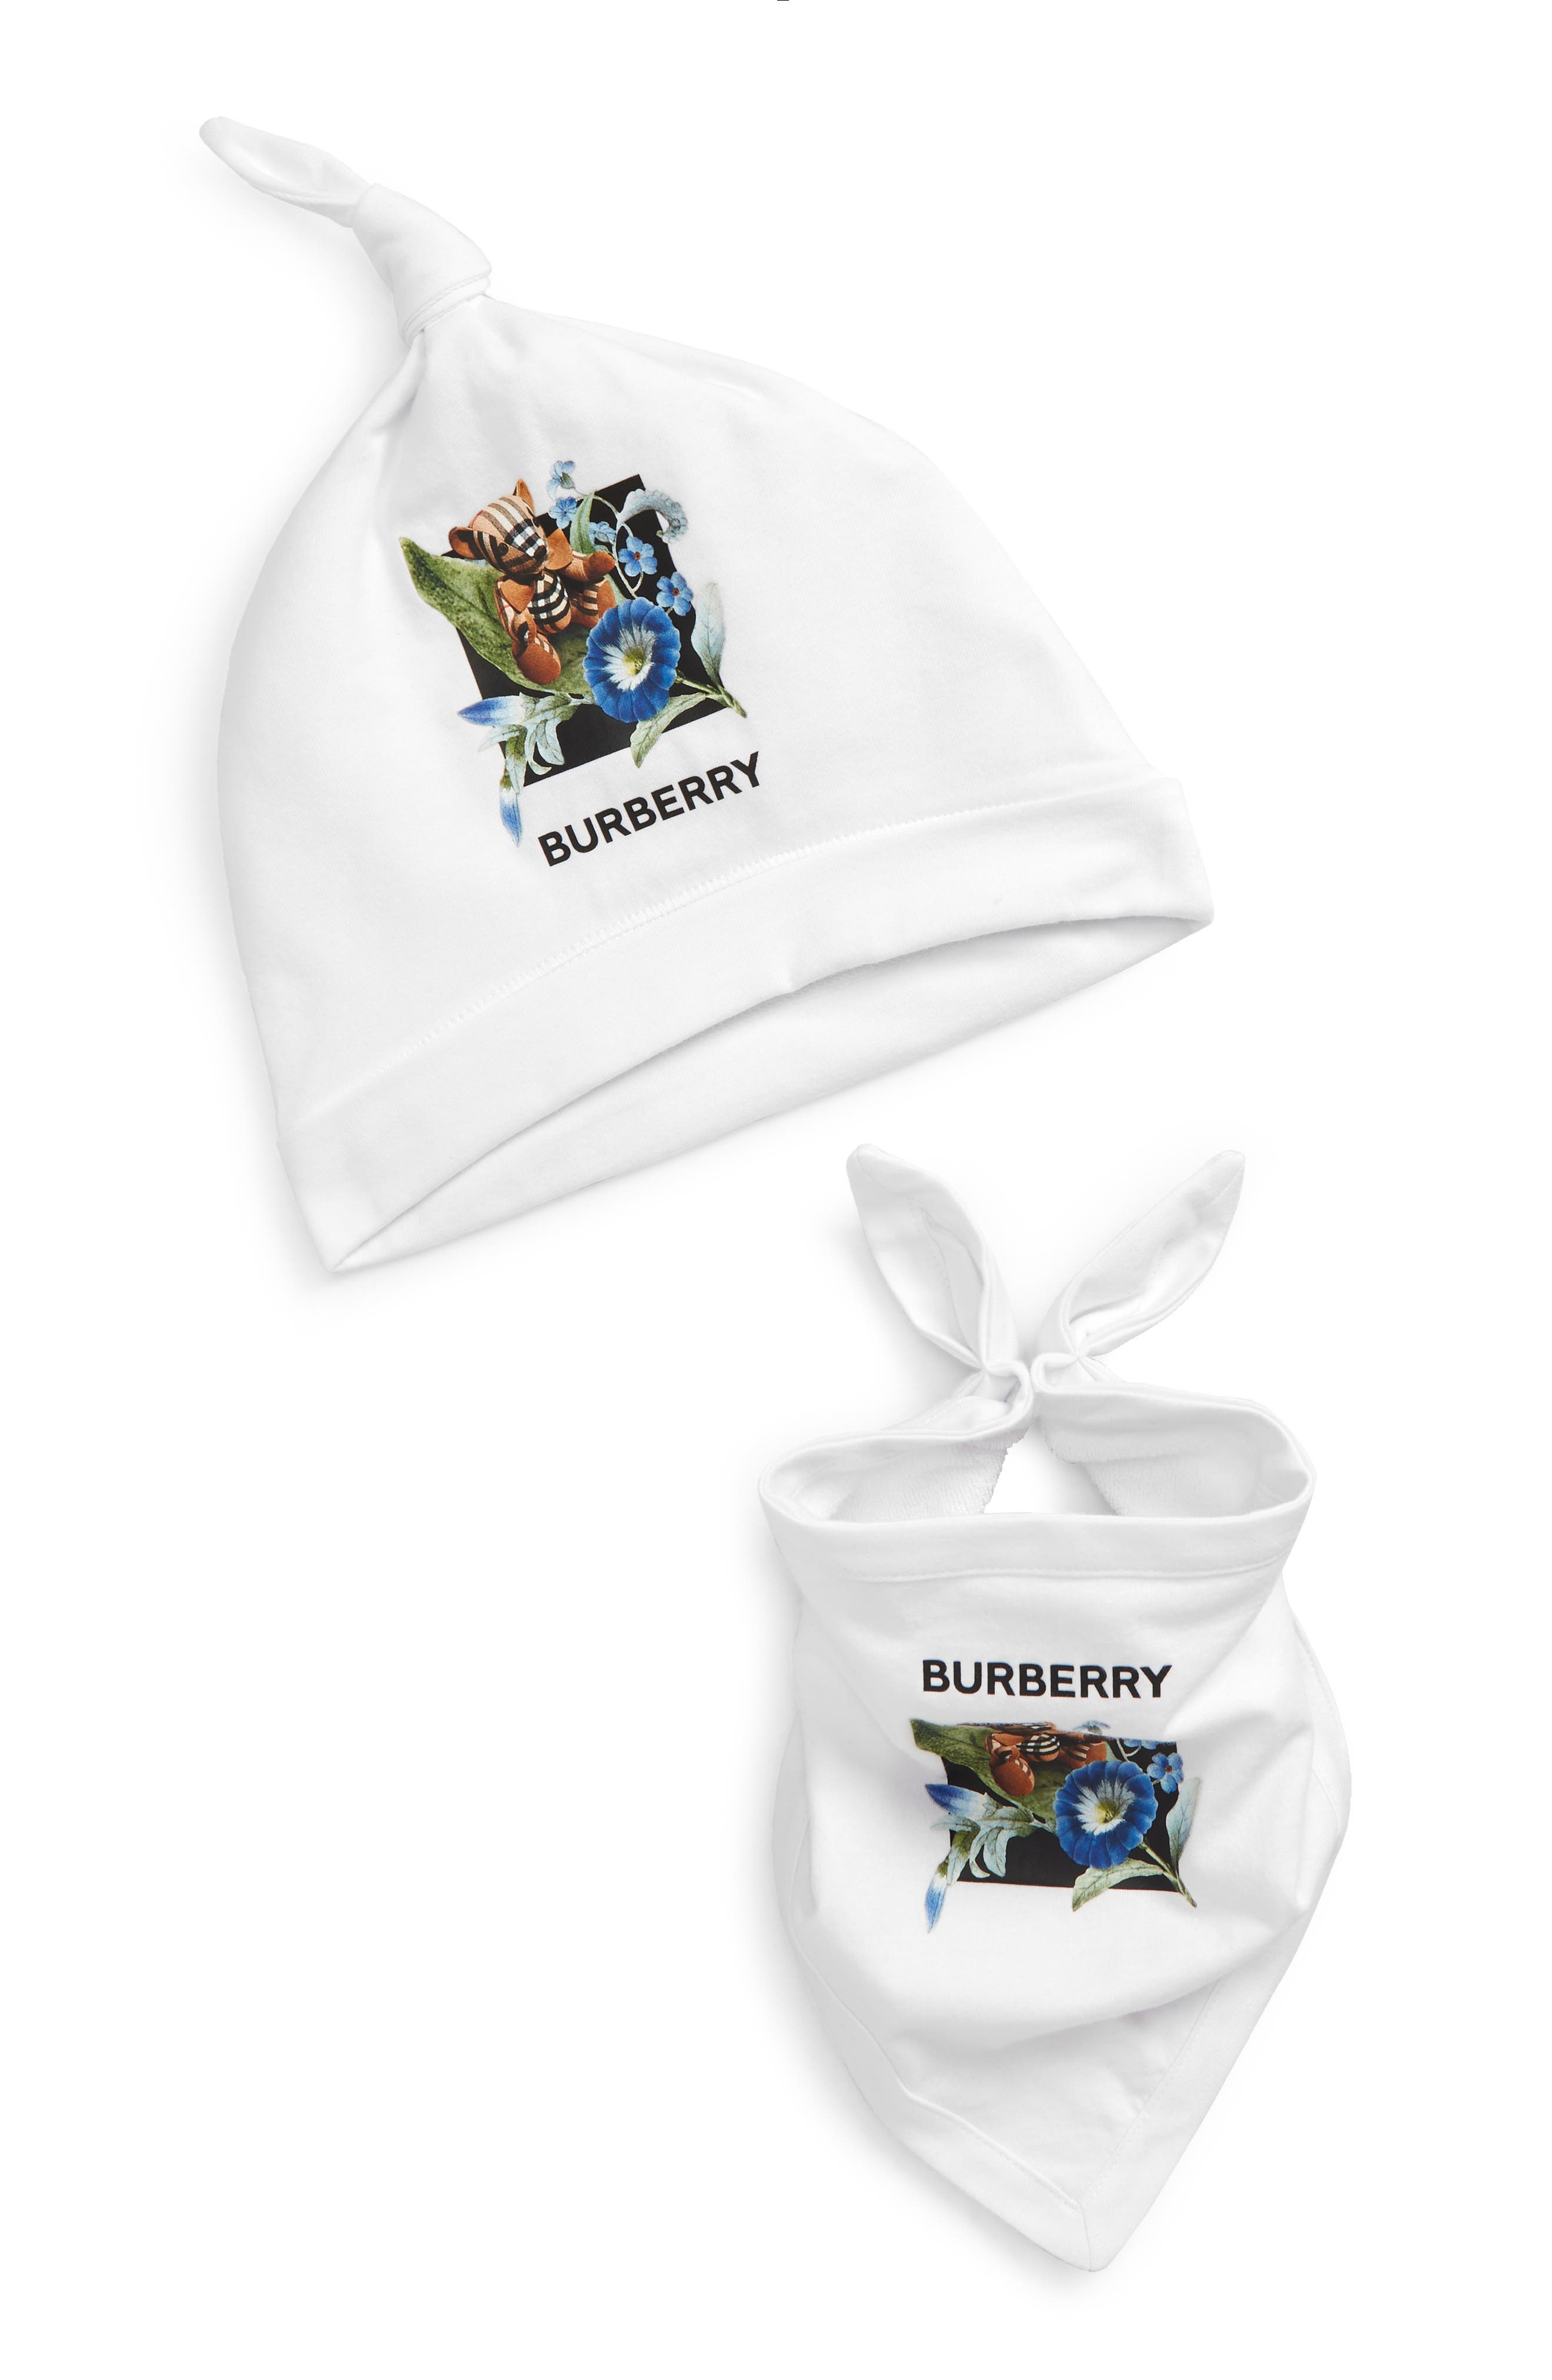 Burberry Floral & Bear Print Cotton Hat & Bib Set in White at Nordstrom, Size 6-9 M Us